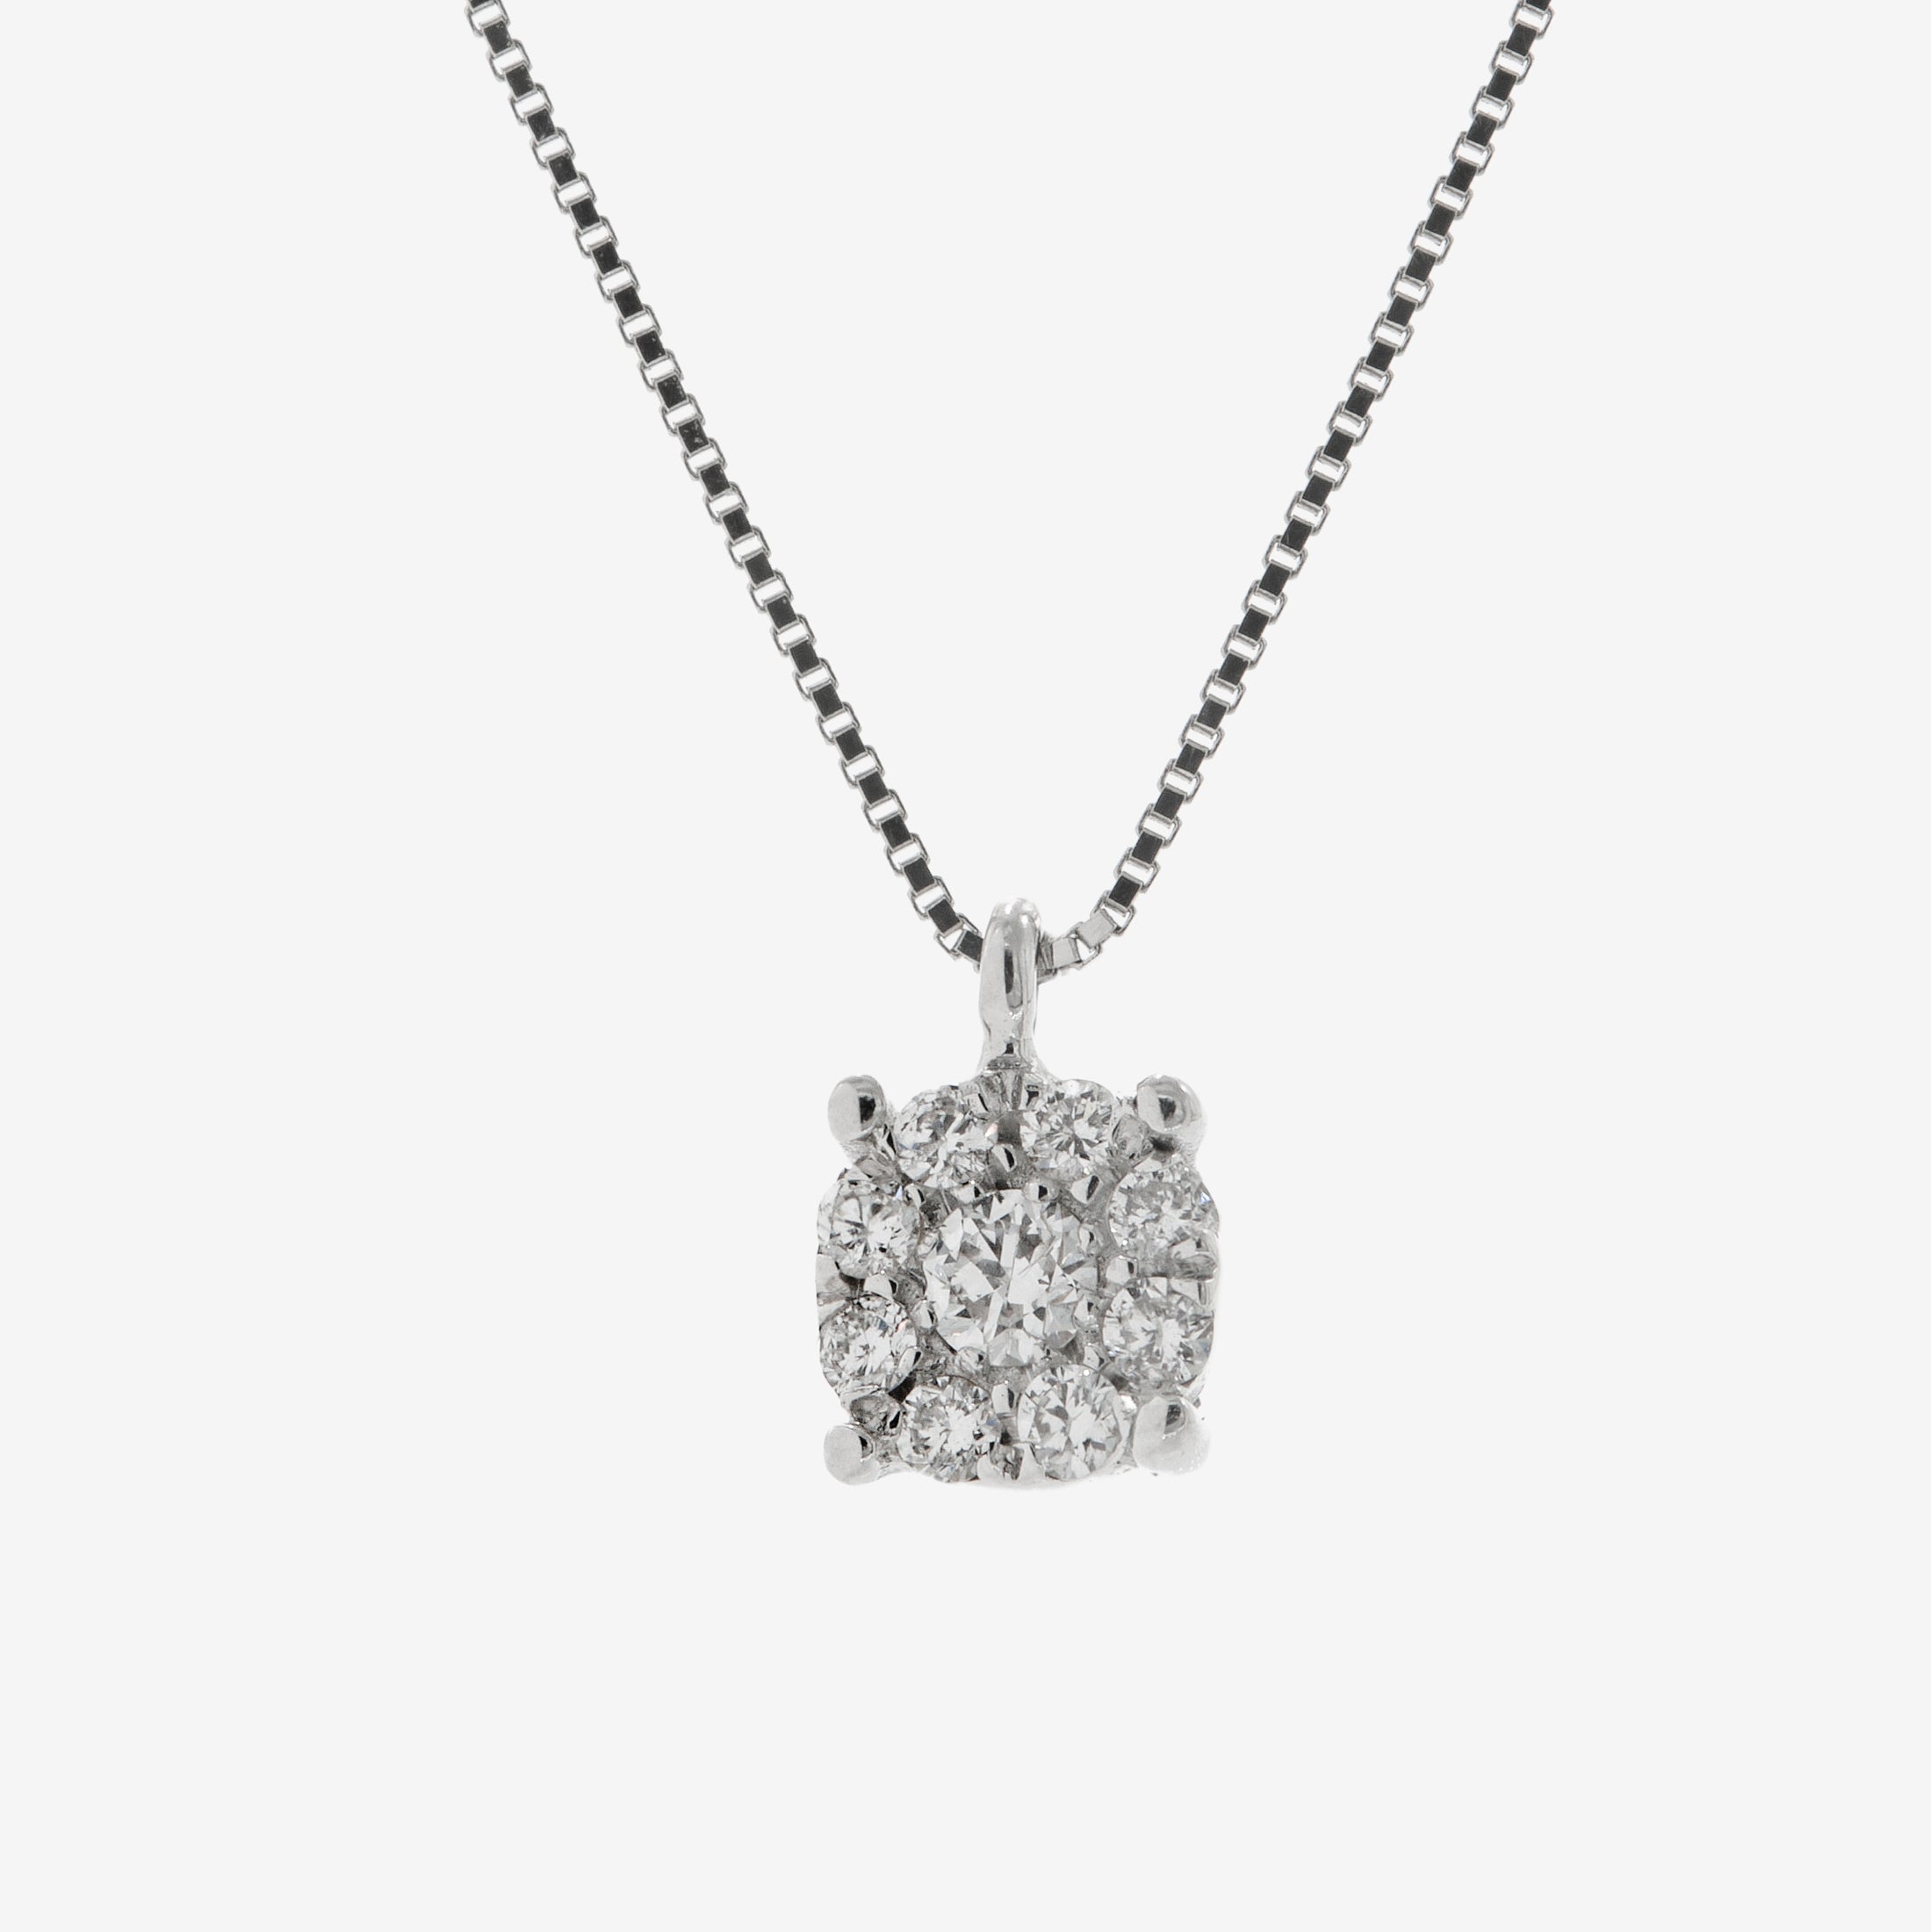 Quon necklace with diamonds